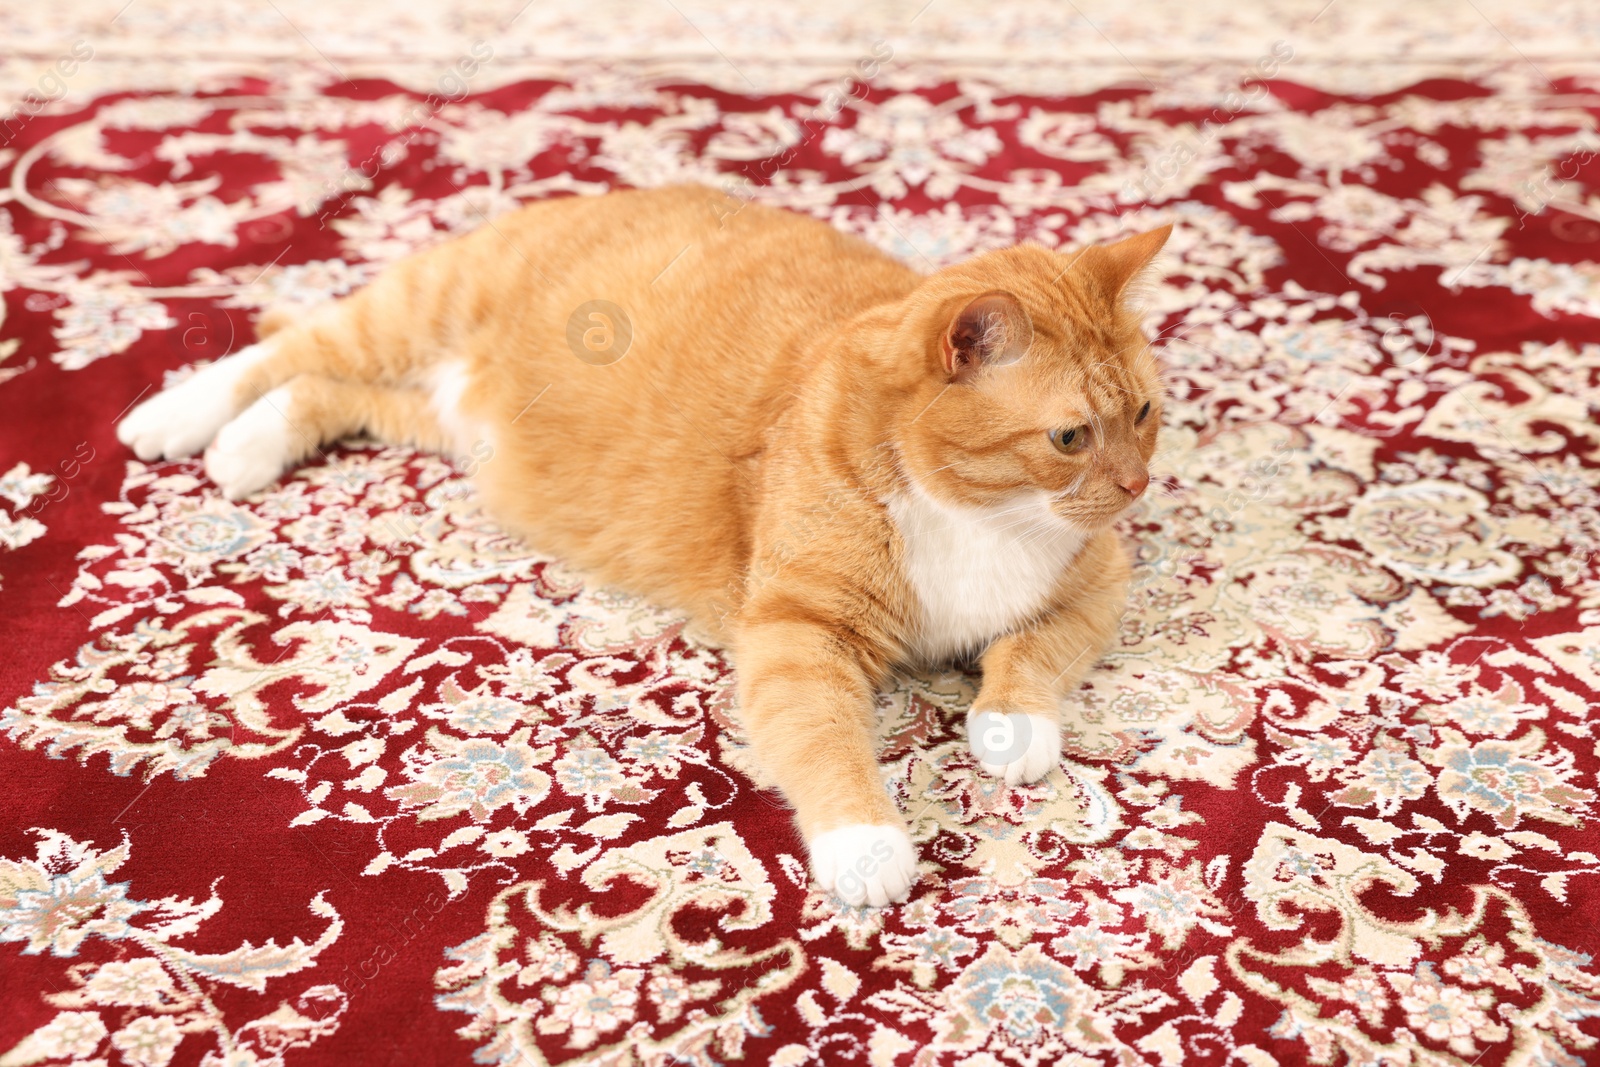 Photo of Cute ginger cat lying on carpet with pattern